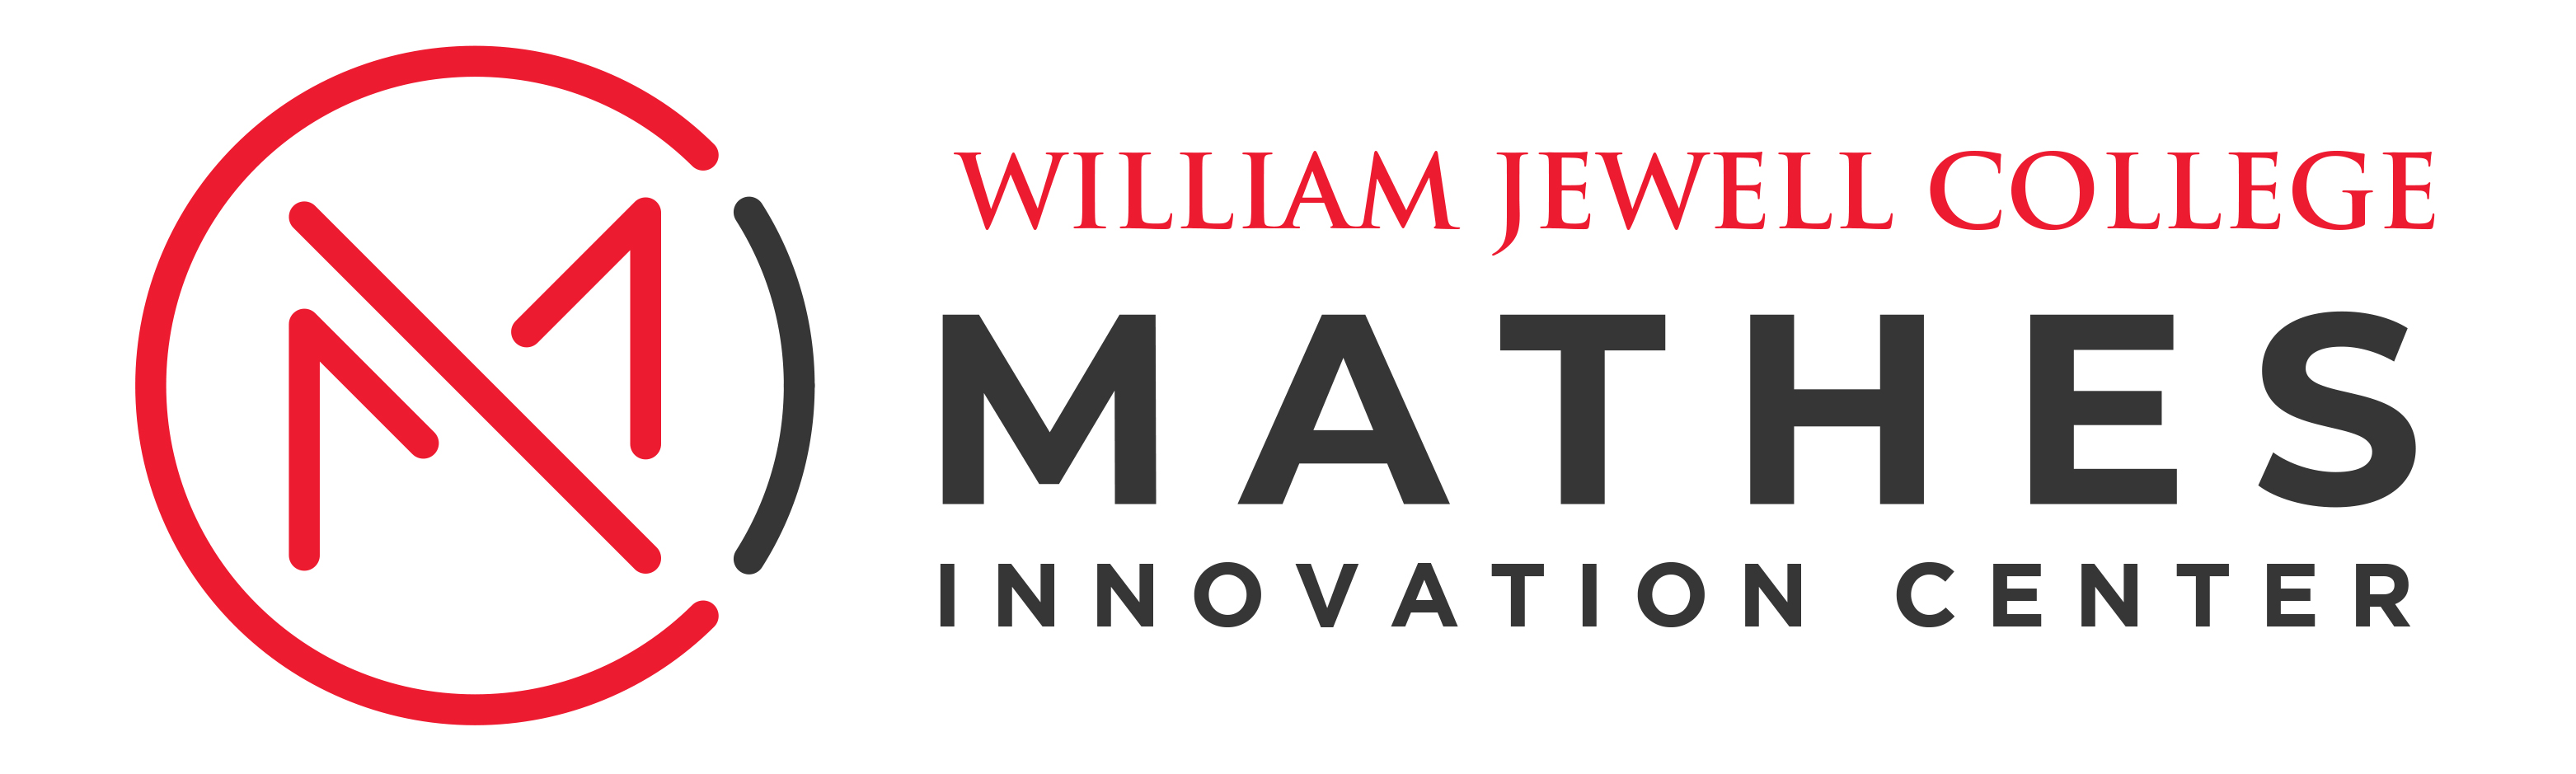 Mathes Innovation Center at Jewell